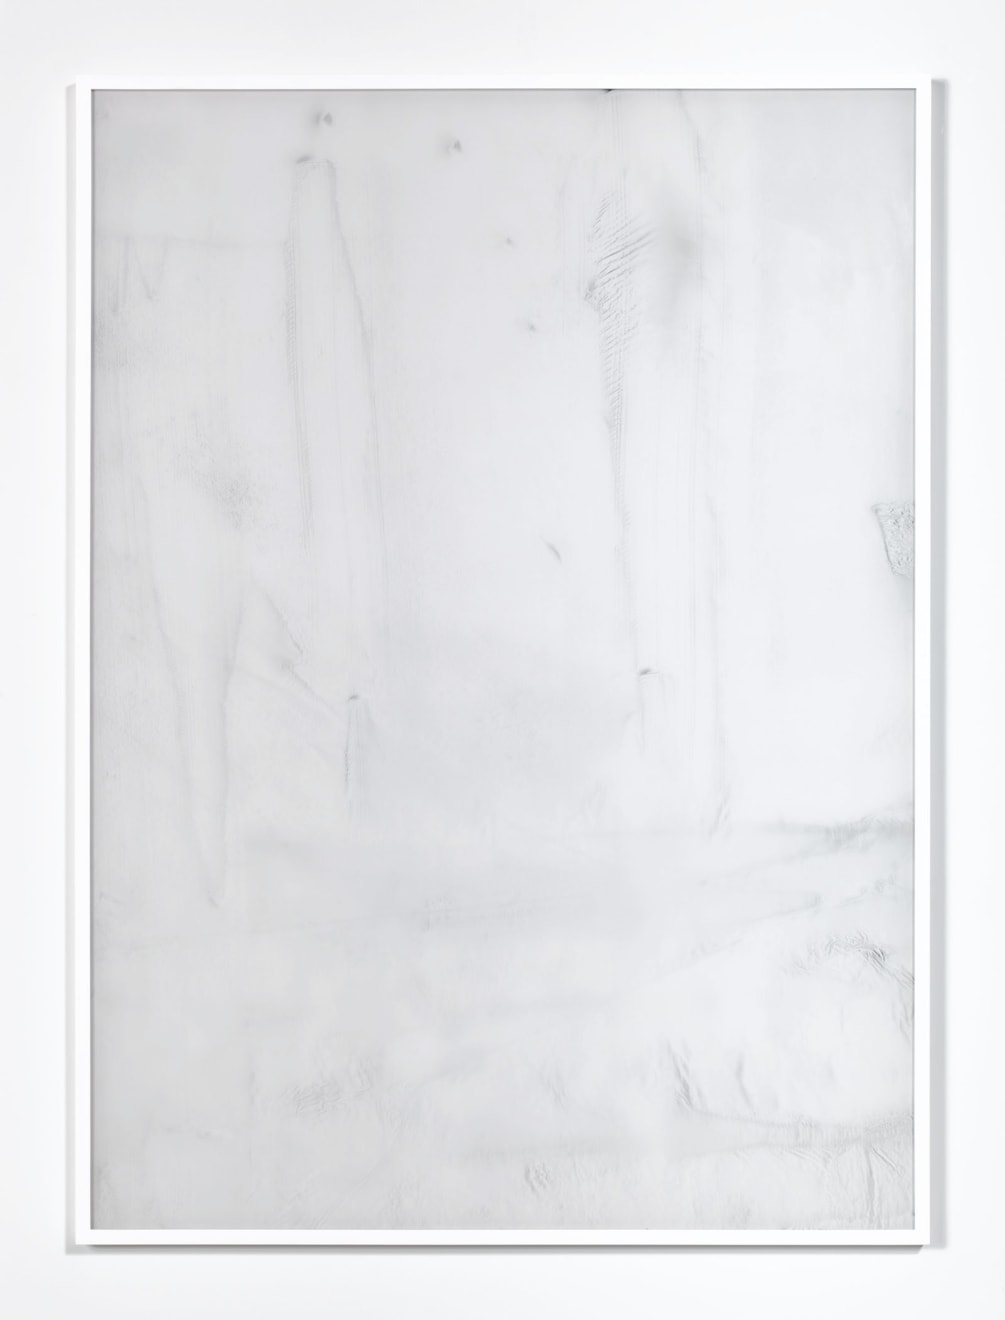 Anthony Pearson Untitled (White Opaque), 2010